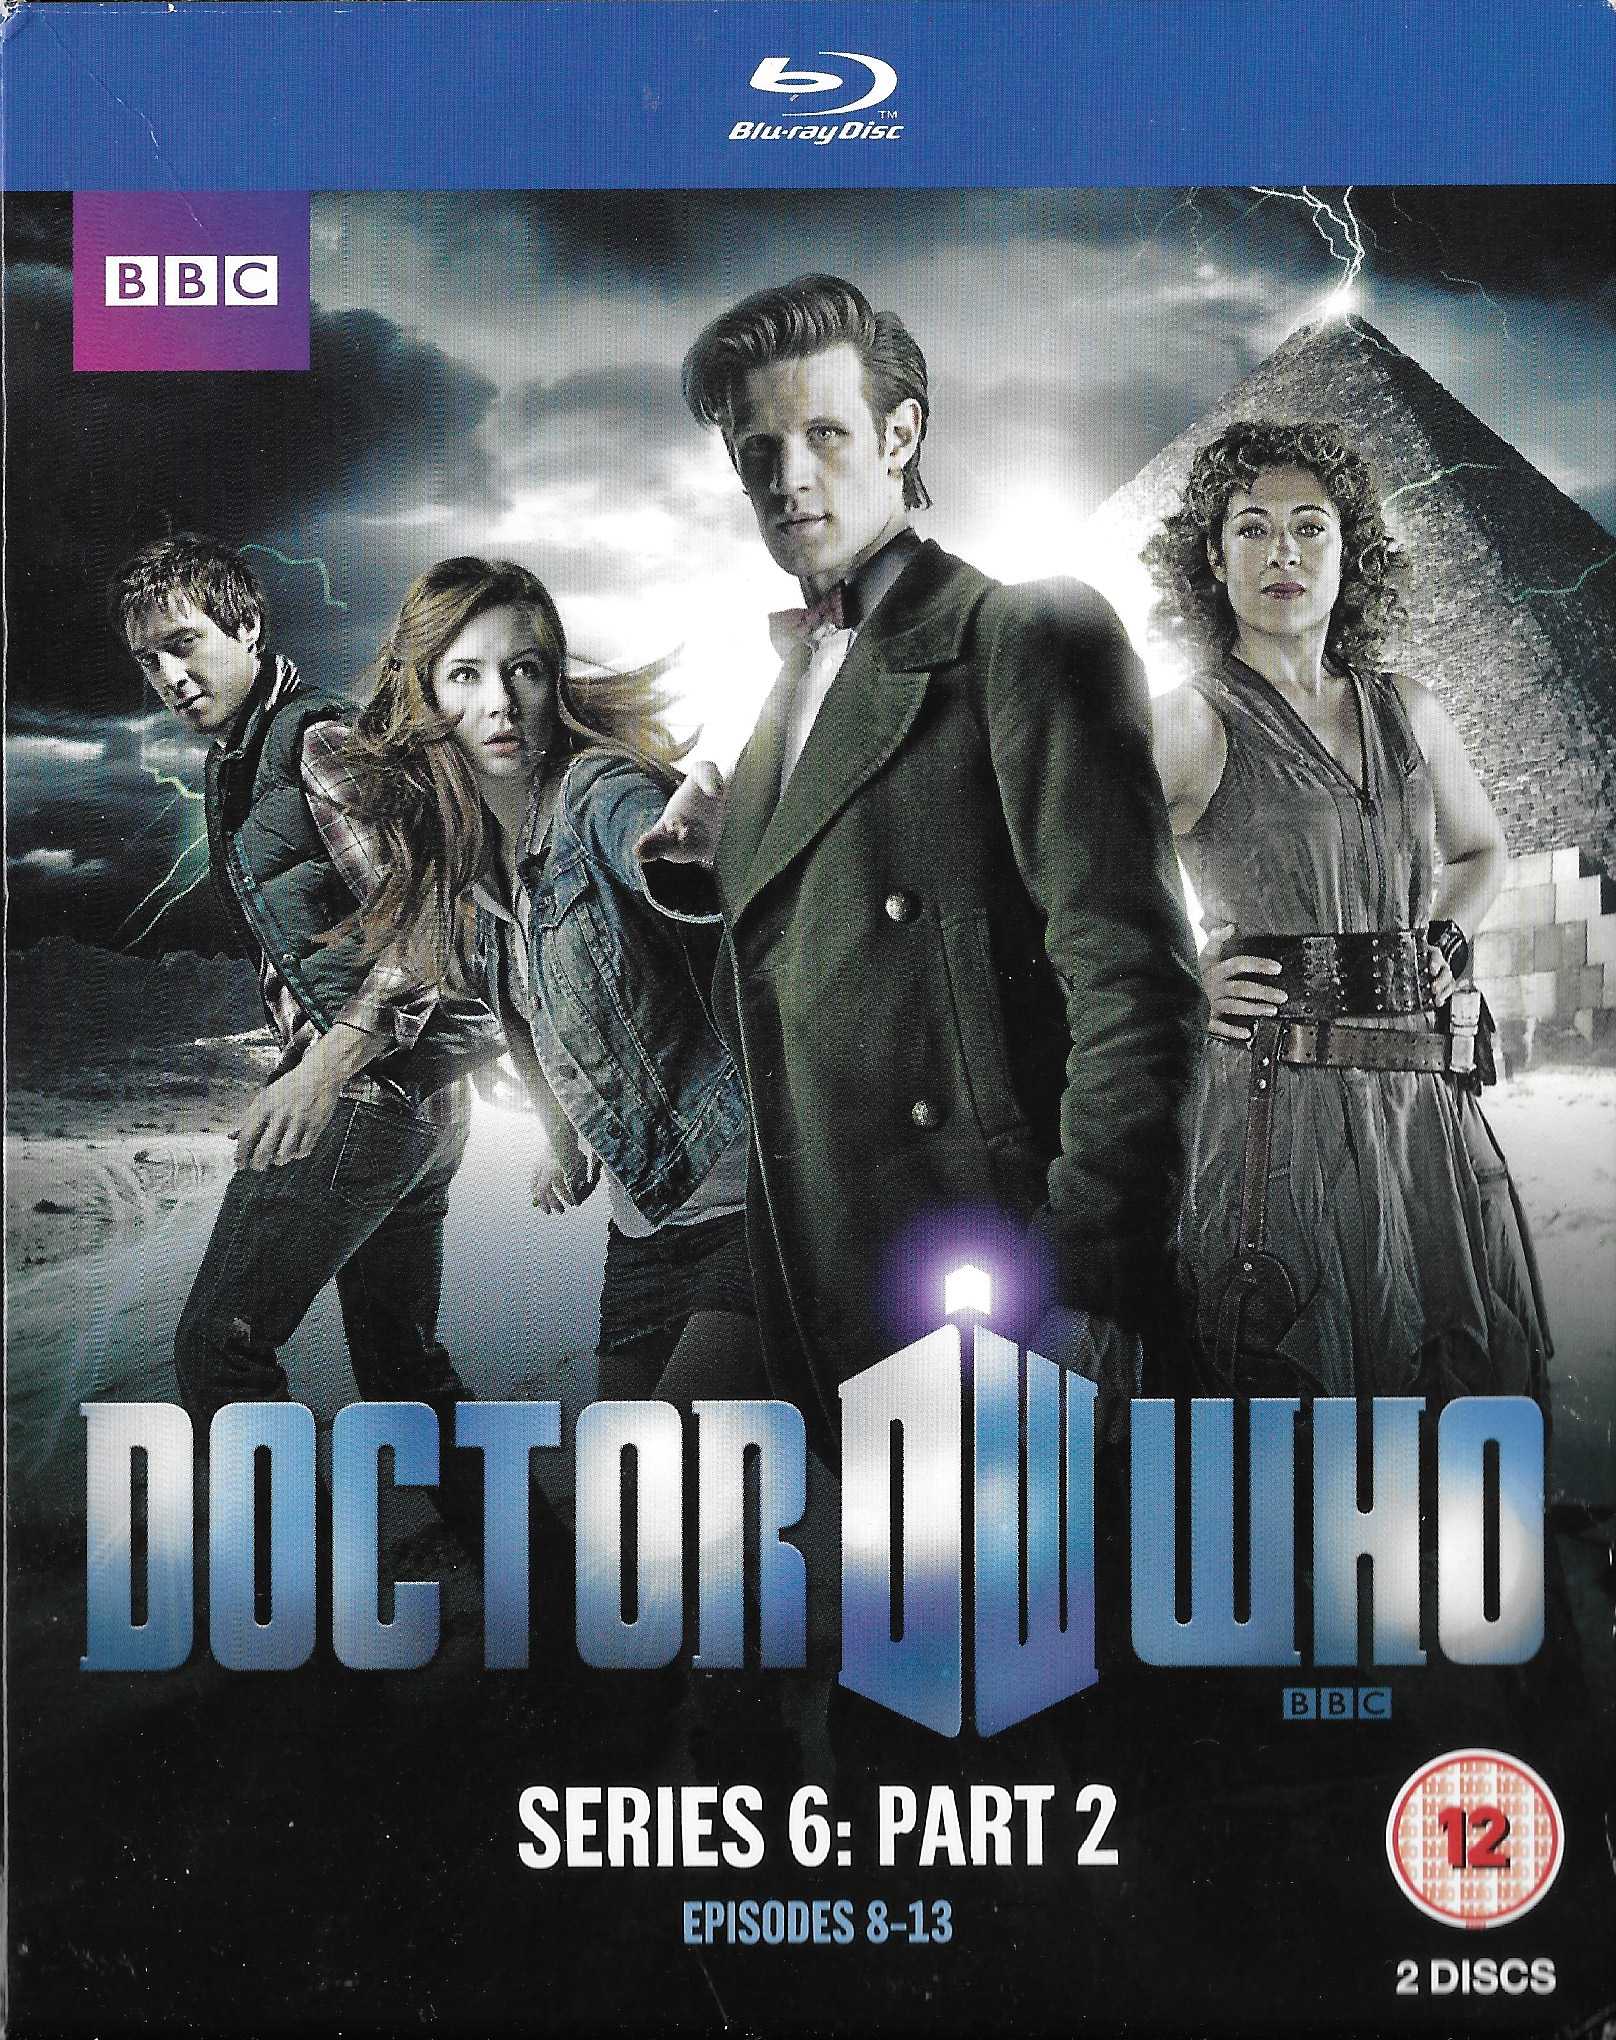 Picture of BBCBD 0152 Doctor Who - Series 6, part 2 by artist Steven Moffat / Mark Gatiss / Tom Macrae / Toby Whithouse / Gareth Roberts from the BBC blu-rays - Records and Tapes library